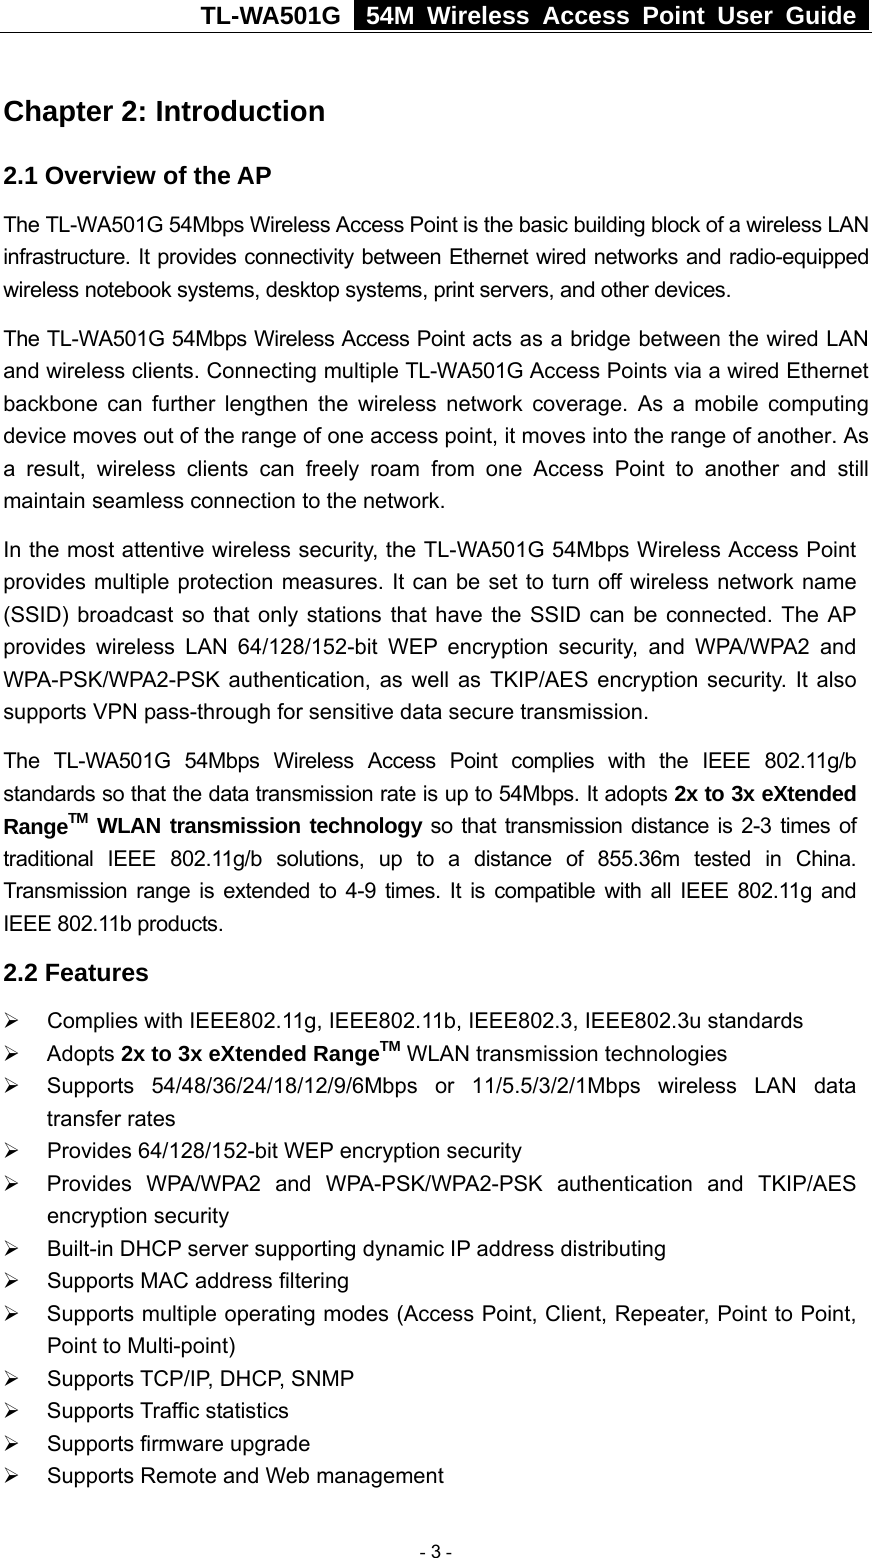 TL-WA501G   54M Wireless Access Point User Guide  Chapter 2: Introduction 2.1 Overview of the AP The TL-WA501G 54Mbps Wireless Access Point is the basic building block of a wireless LAN infrastructure. It provides connectivity between Ethernet wired networks and radio-equipped wireless notebook systems, desktop systems, print servers, and other devices.   The TL-WA501G 54Mbps Wireless Access Point acts as a bridge between the wired LAN and wireless clients. Connecting multiple TL-WA501G Access Points via a wired Ethernet backbone can further lengthen the wireless network coverage. As a mobile computing device moves out of the range of one access point, it moves into the range of another. As a result, wireless clients can freely roam from one Access Point to another and still maintain seamless connection to the network. In the most attentive wireless security, the TL-WA501G 54Mbps Wireless Access Point provides multiple protection measures. It can be set to turn off wireless network name (SSID) broadcast so that only stations that have the SSID can be connected. The AP provides wireless LAN 64/128/152-bit WEP encryption security, and WPA/WPA2 and WPA-PSK/WPA2-PSK authentication, as well as TKIP/AES encryption security. It also supports VPN pass-through for sensitive data secure transmission. The TL-WA501G 54Mbps Wireless Access Point complies with the IEEE 802.11g/b standards so that the data transmission rate is up to 54Mbps. It adopts 2x to 3x eXtended RangeTM WLAN transmission technology so that transmission distance is 2-3 times of traditional IEEE 802.11g/b solutions, up to a distance of 855.36m tested in China. Transmission range is extended to 4-9 times. It is compatible with all IEEE 802.11g and IEEE 802.11b products. 2.2 Features ¾  Complies with IEEE802.11g, IEEE802.11b, IEEE802.3, IEEE802.3u standards ¾ Adopts 2x to 3x eXtended RangeTM WLAN transmission technologies ¾ Supports 54/48/36/24/18/12/9/6Mbps or 11/5.5/3/2/1Mbps wireless LAN data transfer rates ¾  Provides 64/128/152-bit WEP encryption security ¾  Provides WPA/WPA2 and WPA-PSK/WPA2-PSK authentication and TKIP/AES encryption security ¾  Built-in DHCP server supporting dynamic IP address distributing ¾  Supports MAC address filtering ¾  Supports multiple operating modes (Access Point, Client, Repeater, Point to Point, Point to Multi-point) ¾  Supports TCP/IP, DHCP, SNMP ¾ Supports Traffic statistics ¾  Supports firmware upgrade ¾  Supports Remote and Web management  - 3 - 